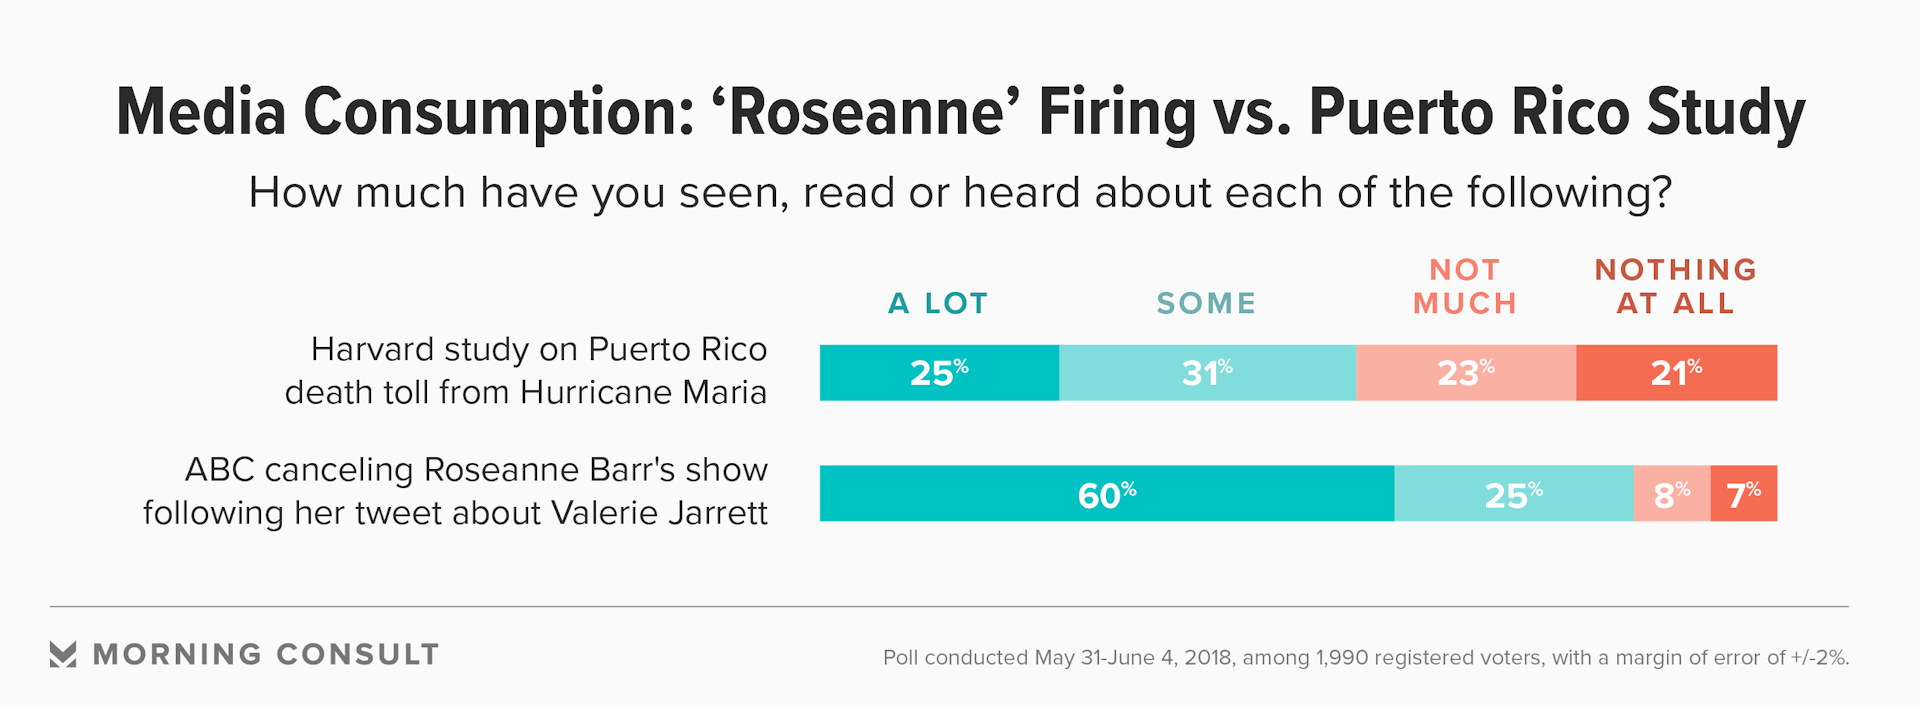 Bar charts comparing awareness of "Roseanne" firing and Hurricane Maria's Death Toll in Puerto Rico